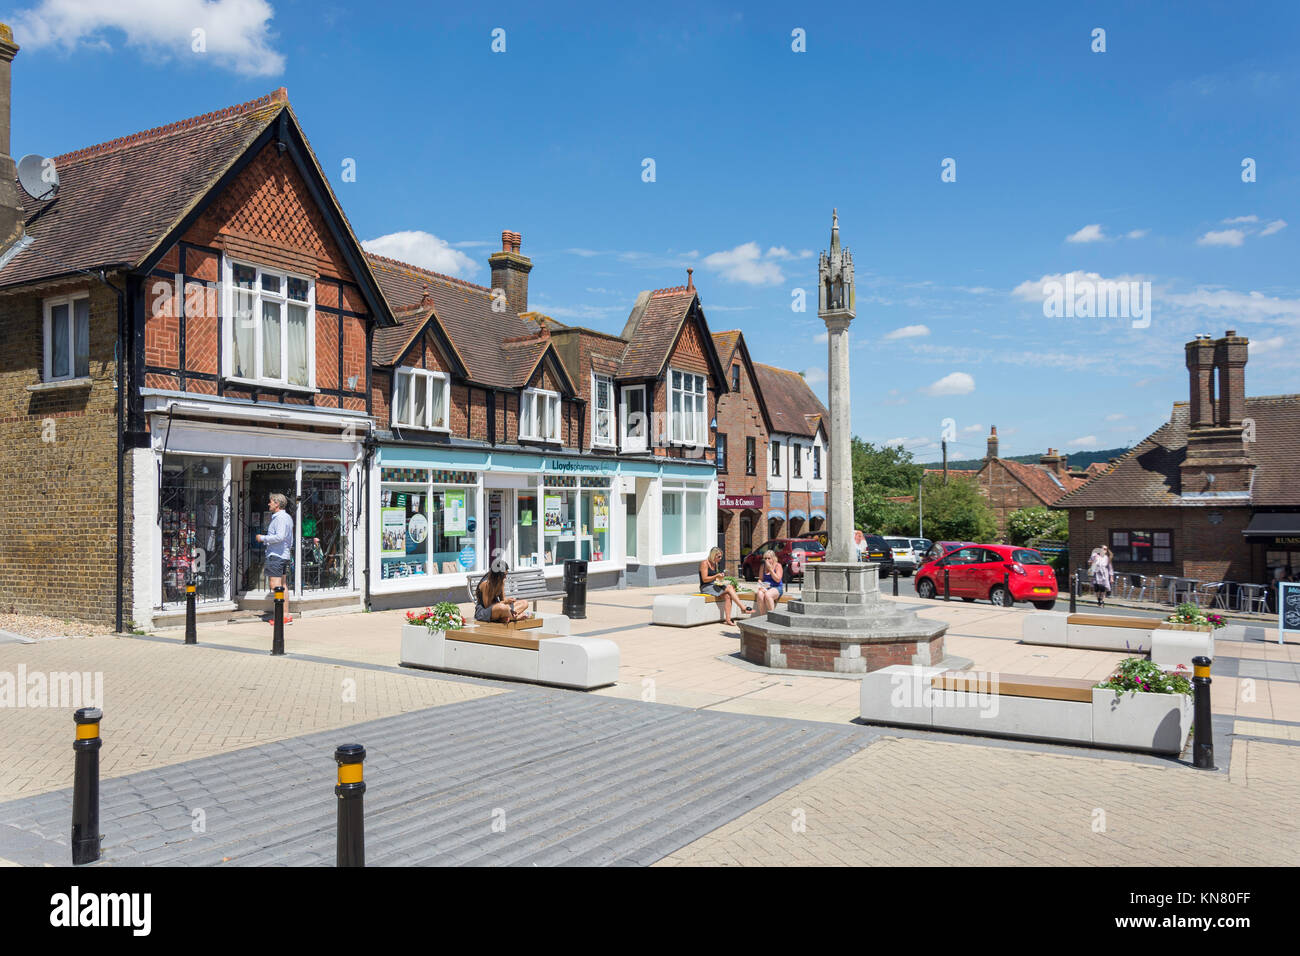 High Street, Wendover, Buckinghamshire, Angleterre, Royaume-Uni Banque D'Images